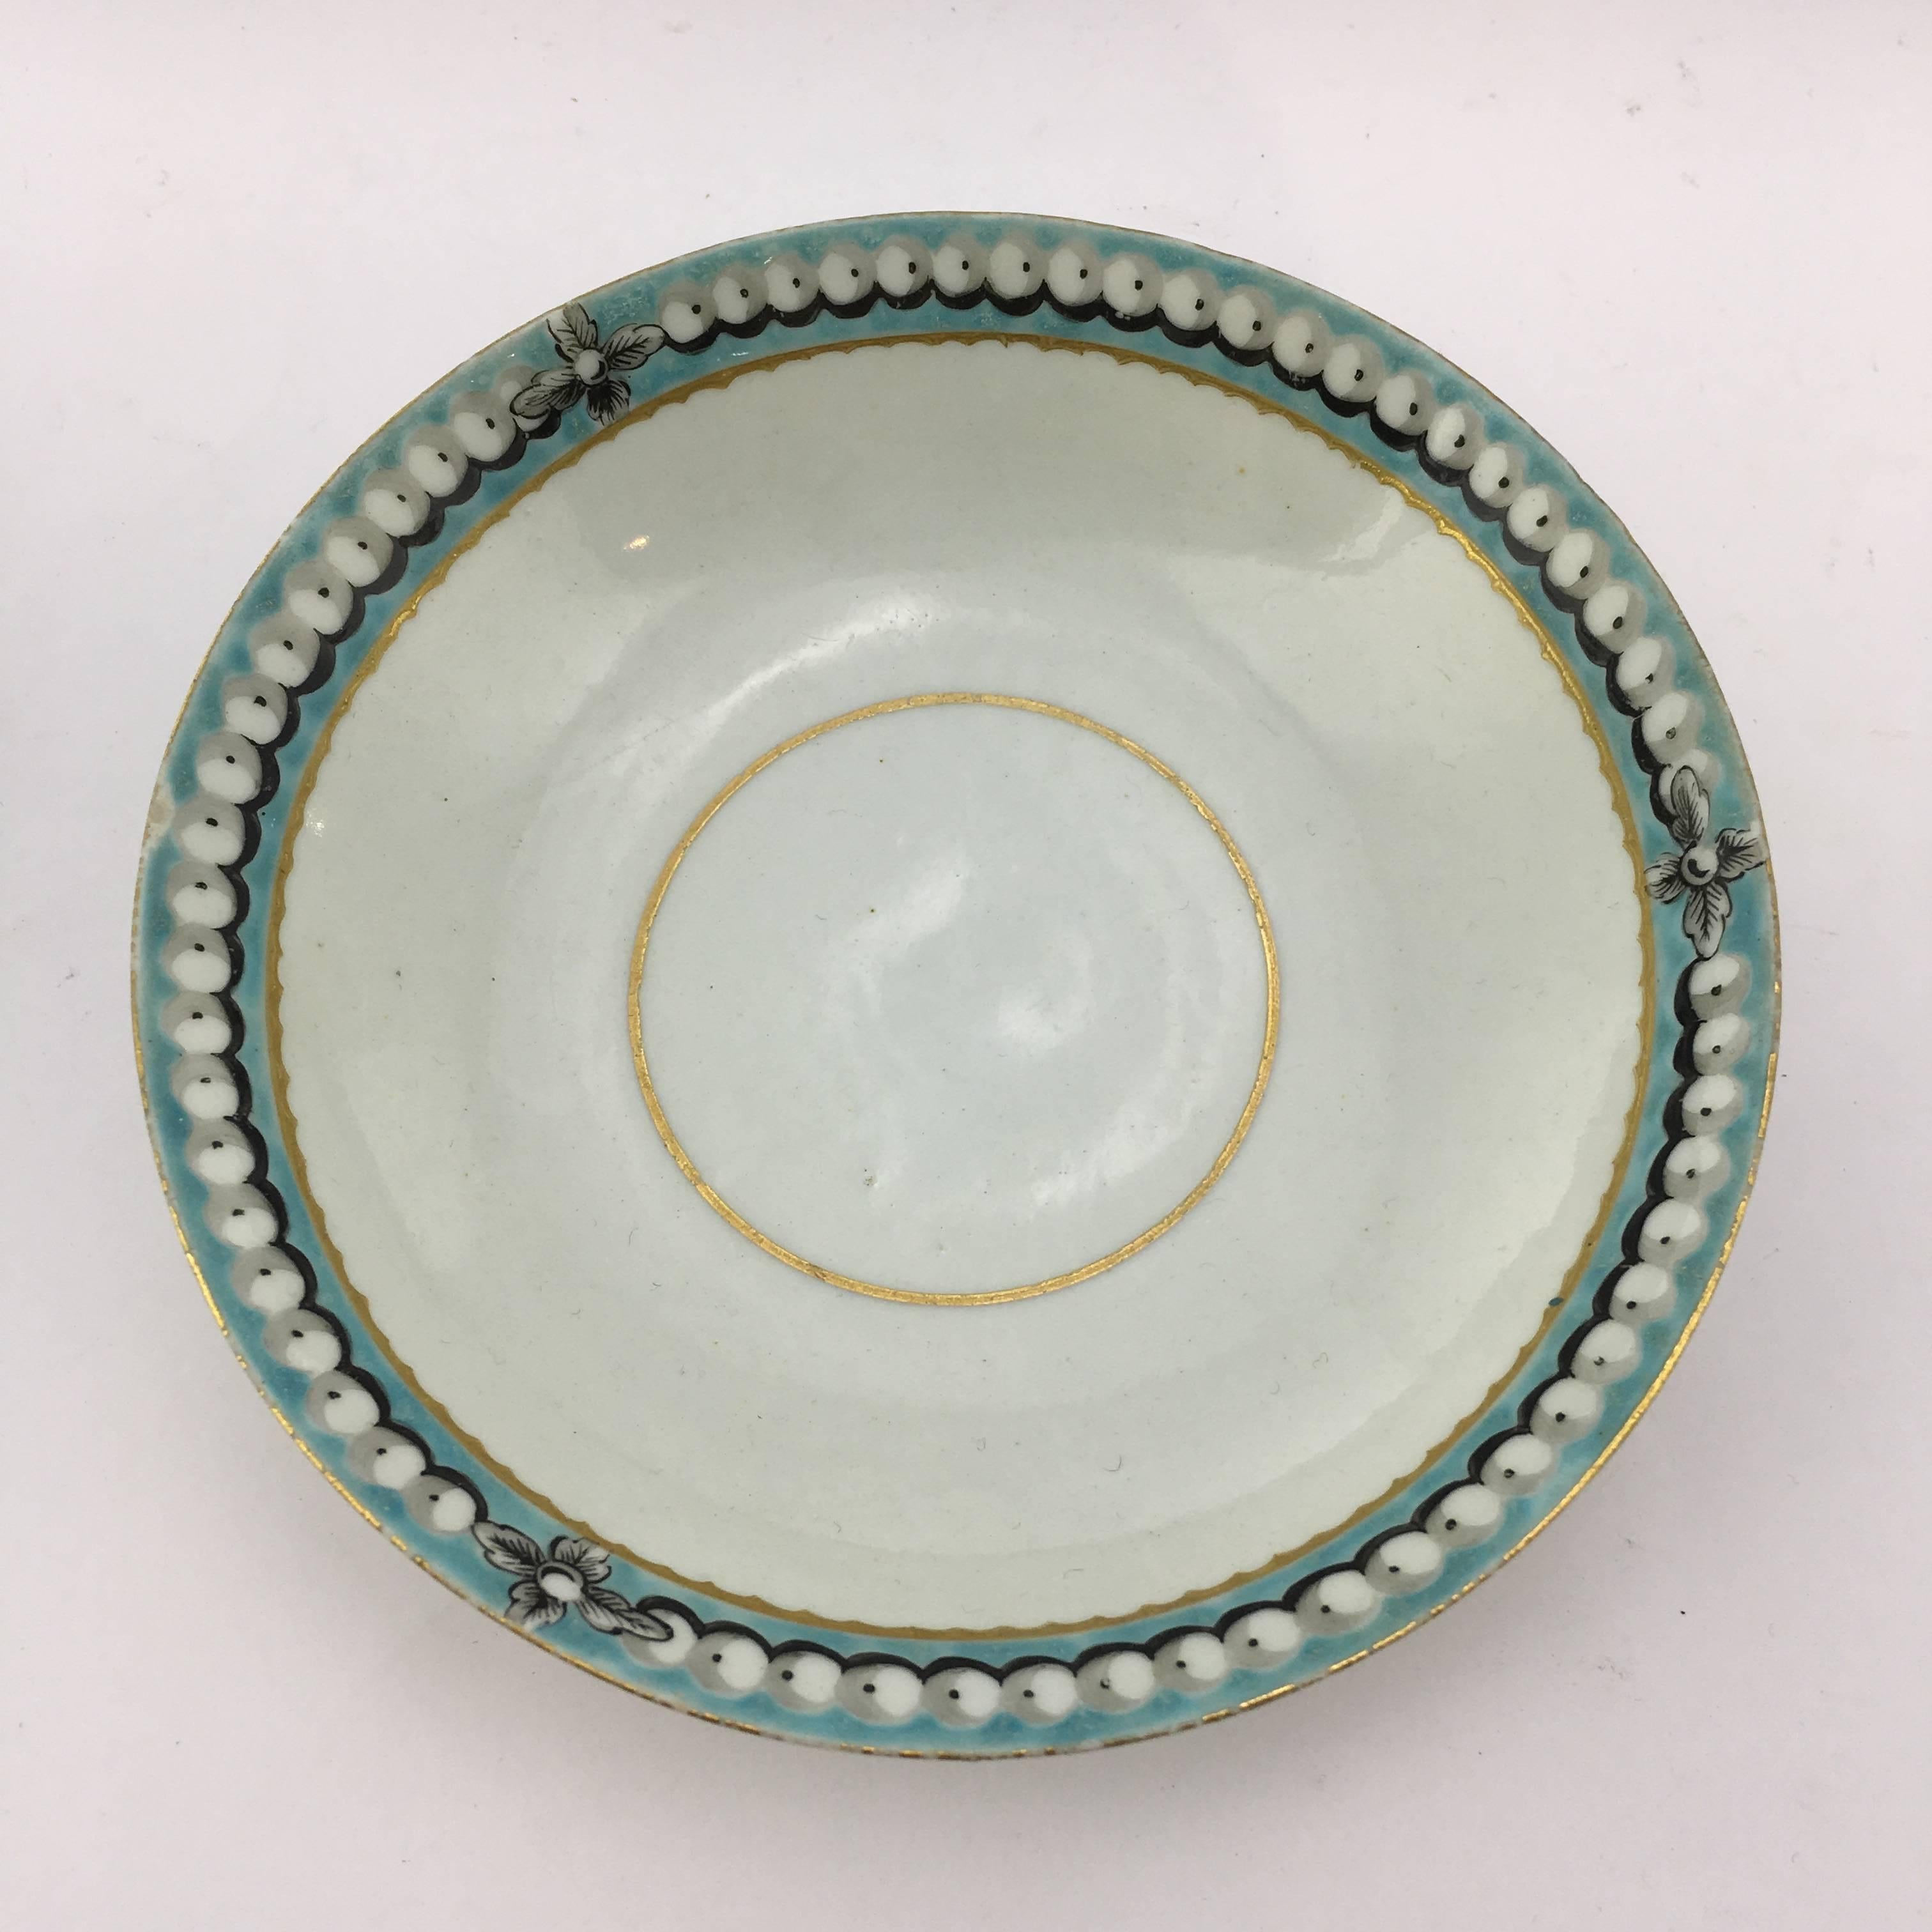 Worcester tea bowl and saucer, decorated in an elegant pattern with turquoise border with pearls, within gold line borders, circa 1770.